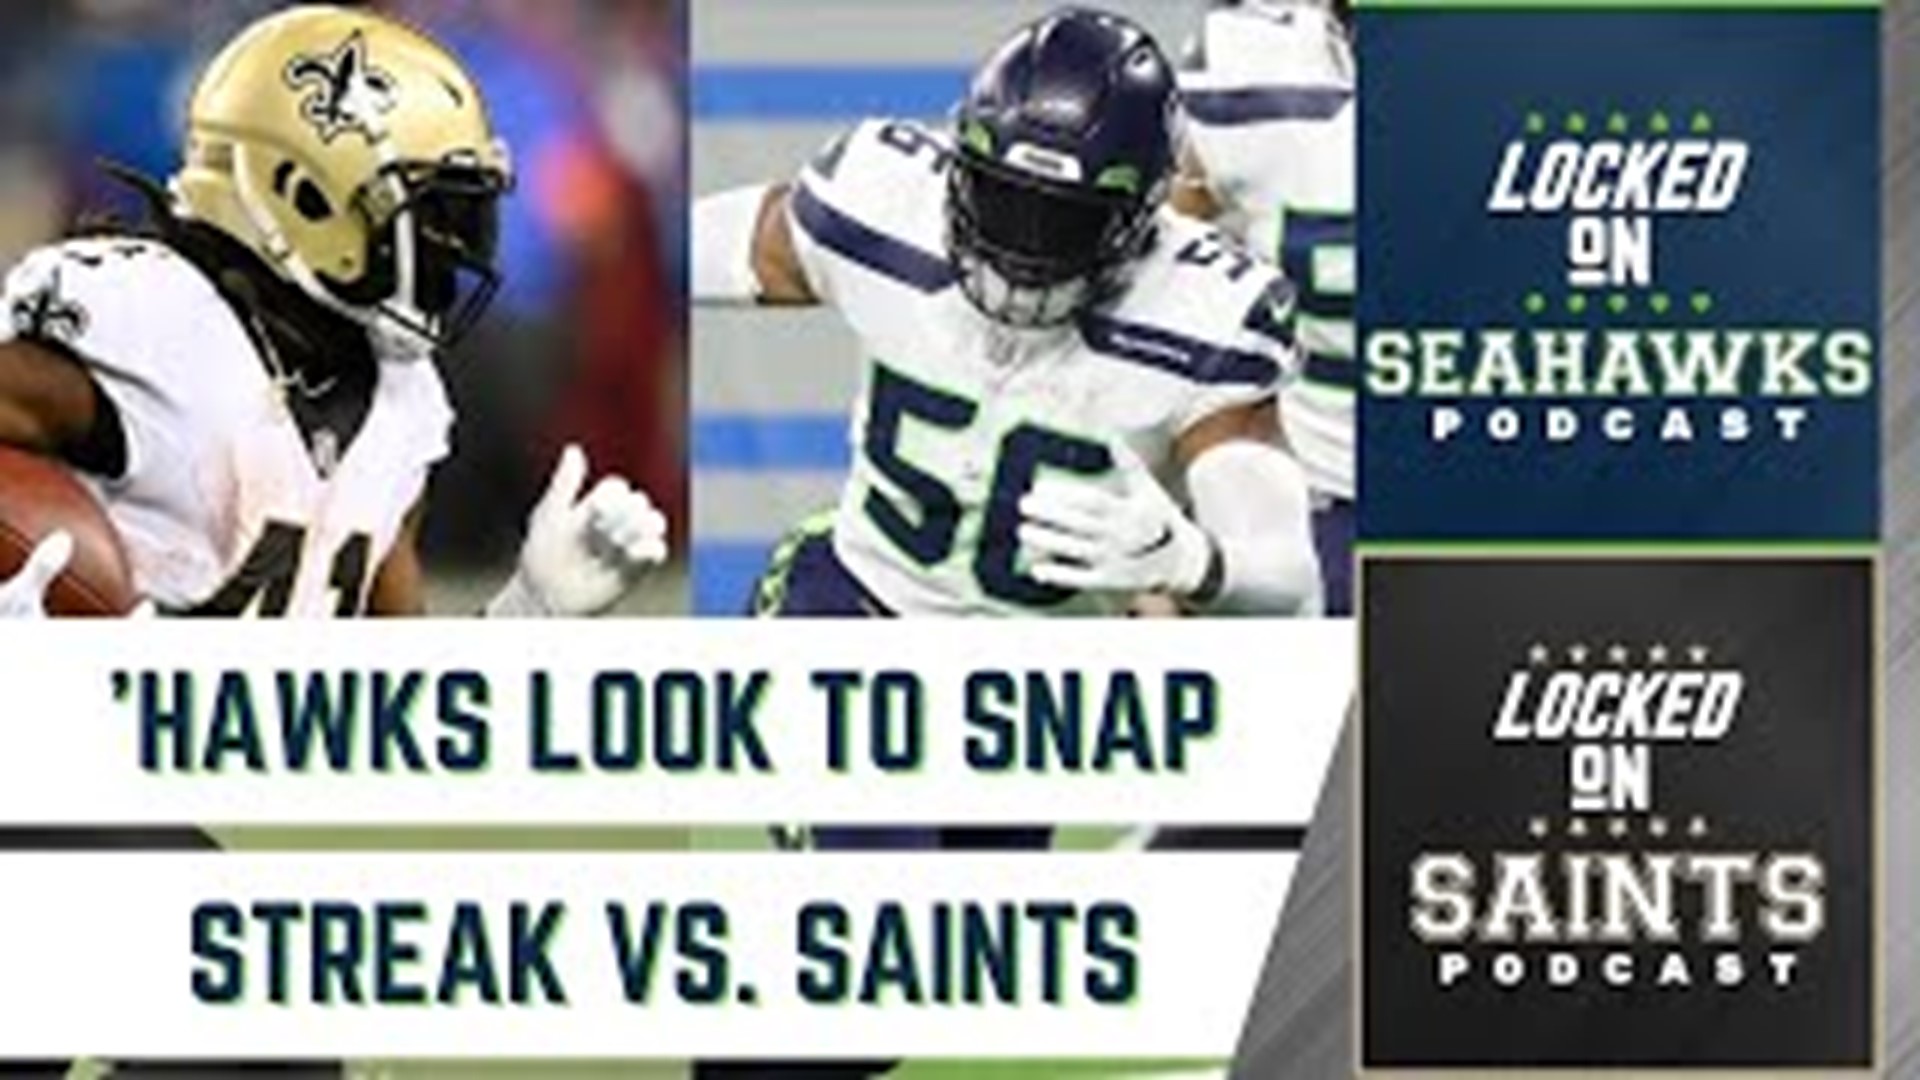 We dive into key storylines in Week 5, including New Orleans' offensive struggles and Seattle's issues stopping opponents on defense and break down matchups to watch